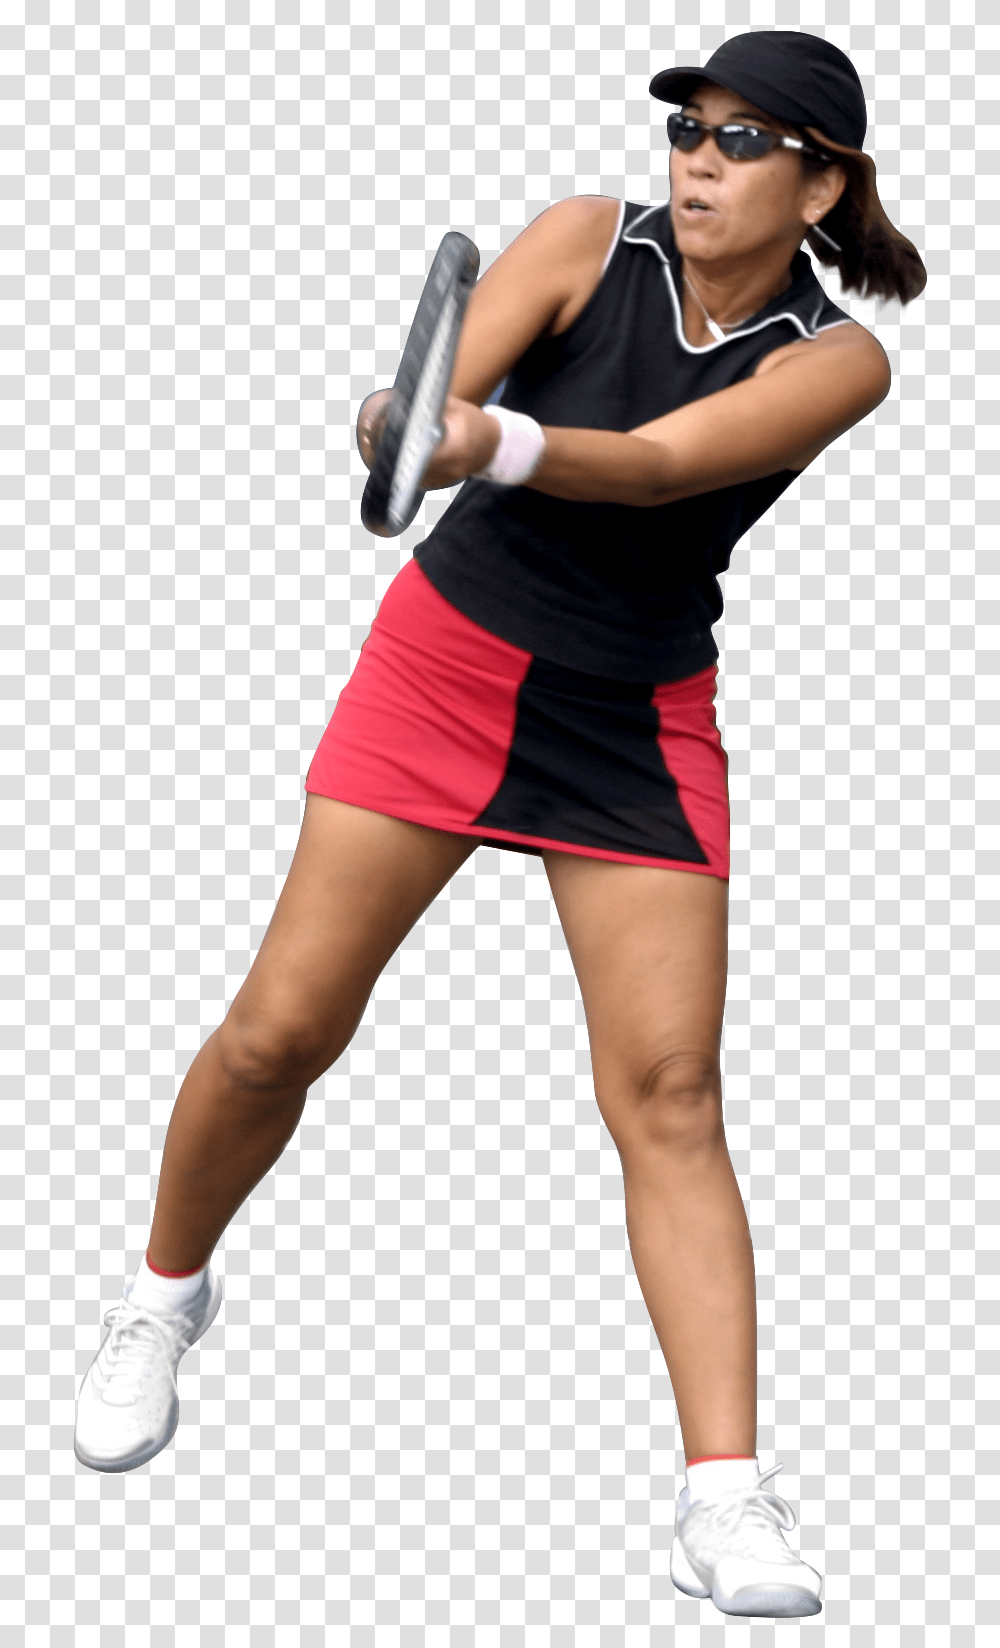 Download Tennis Player Image For Free Girl Tennis Player, Person, Sunglasses, Clothing, Sport Transparent Png